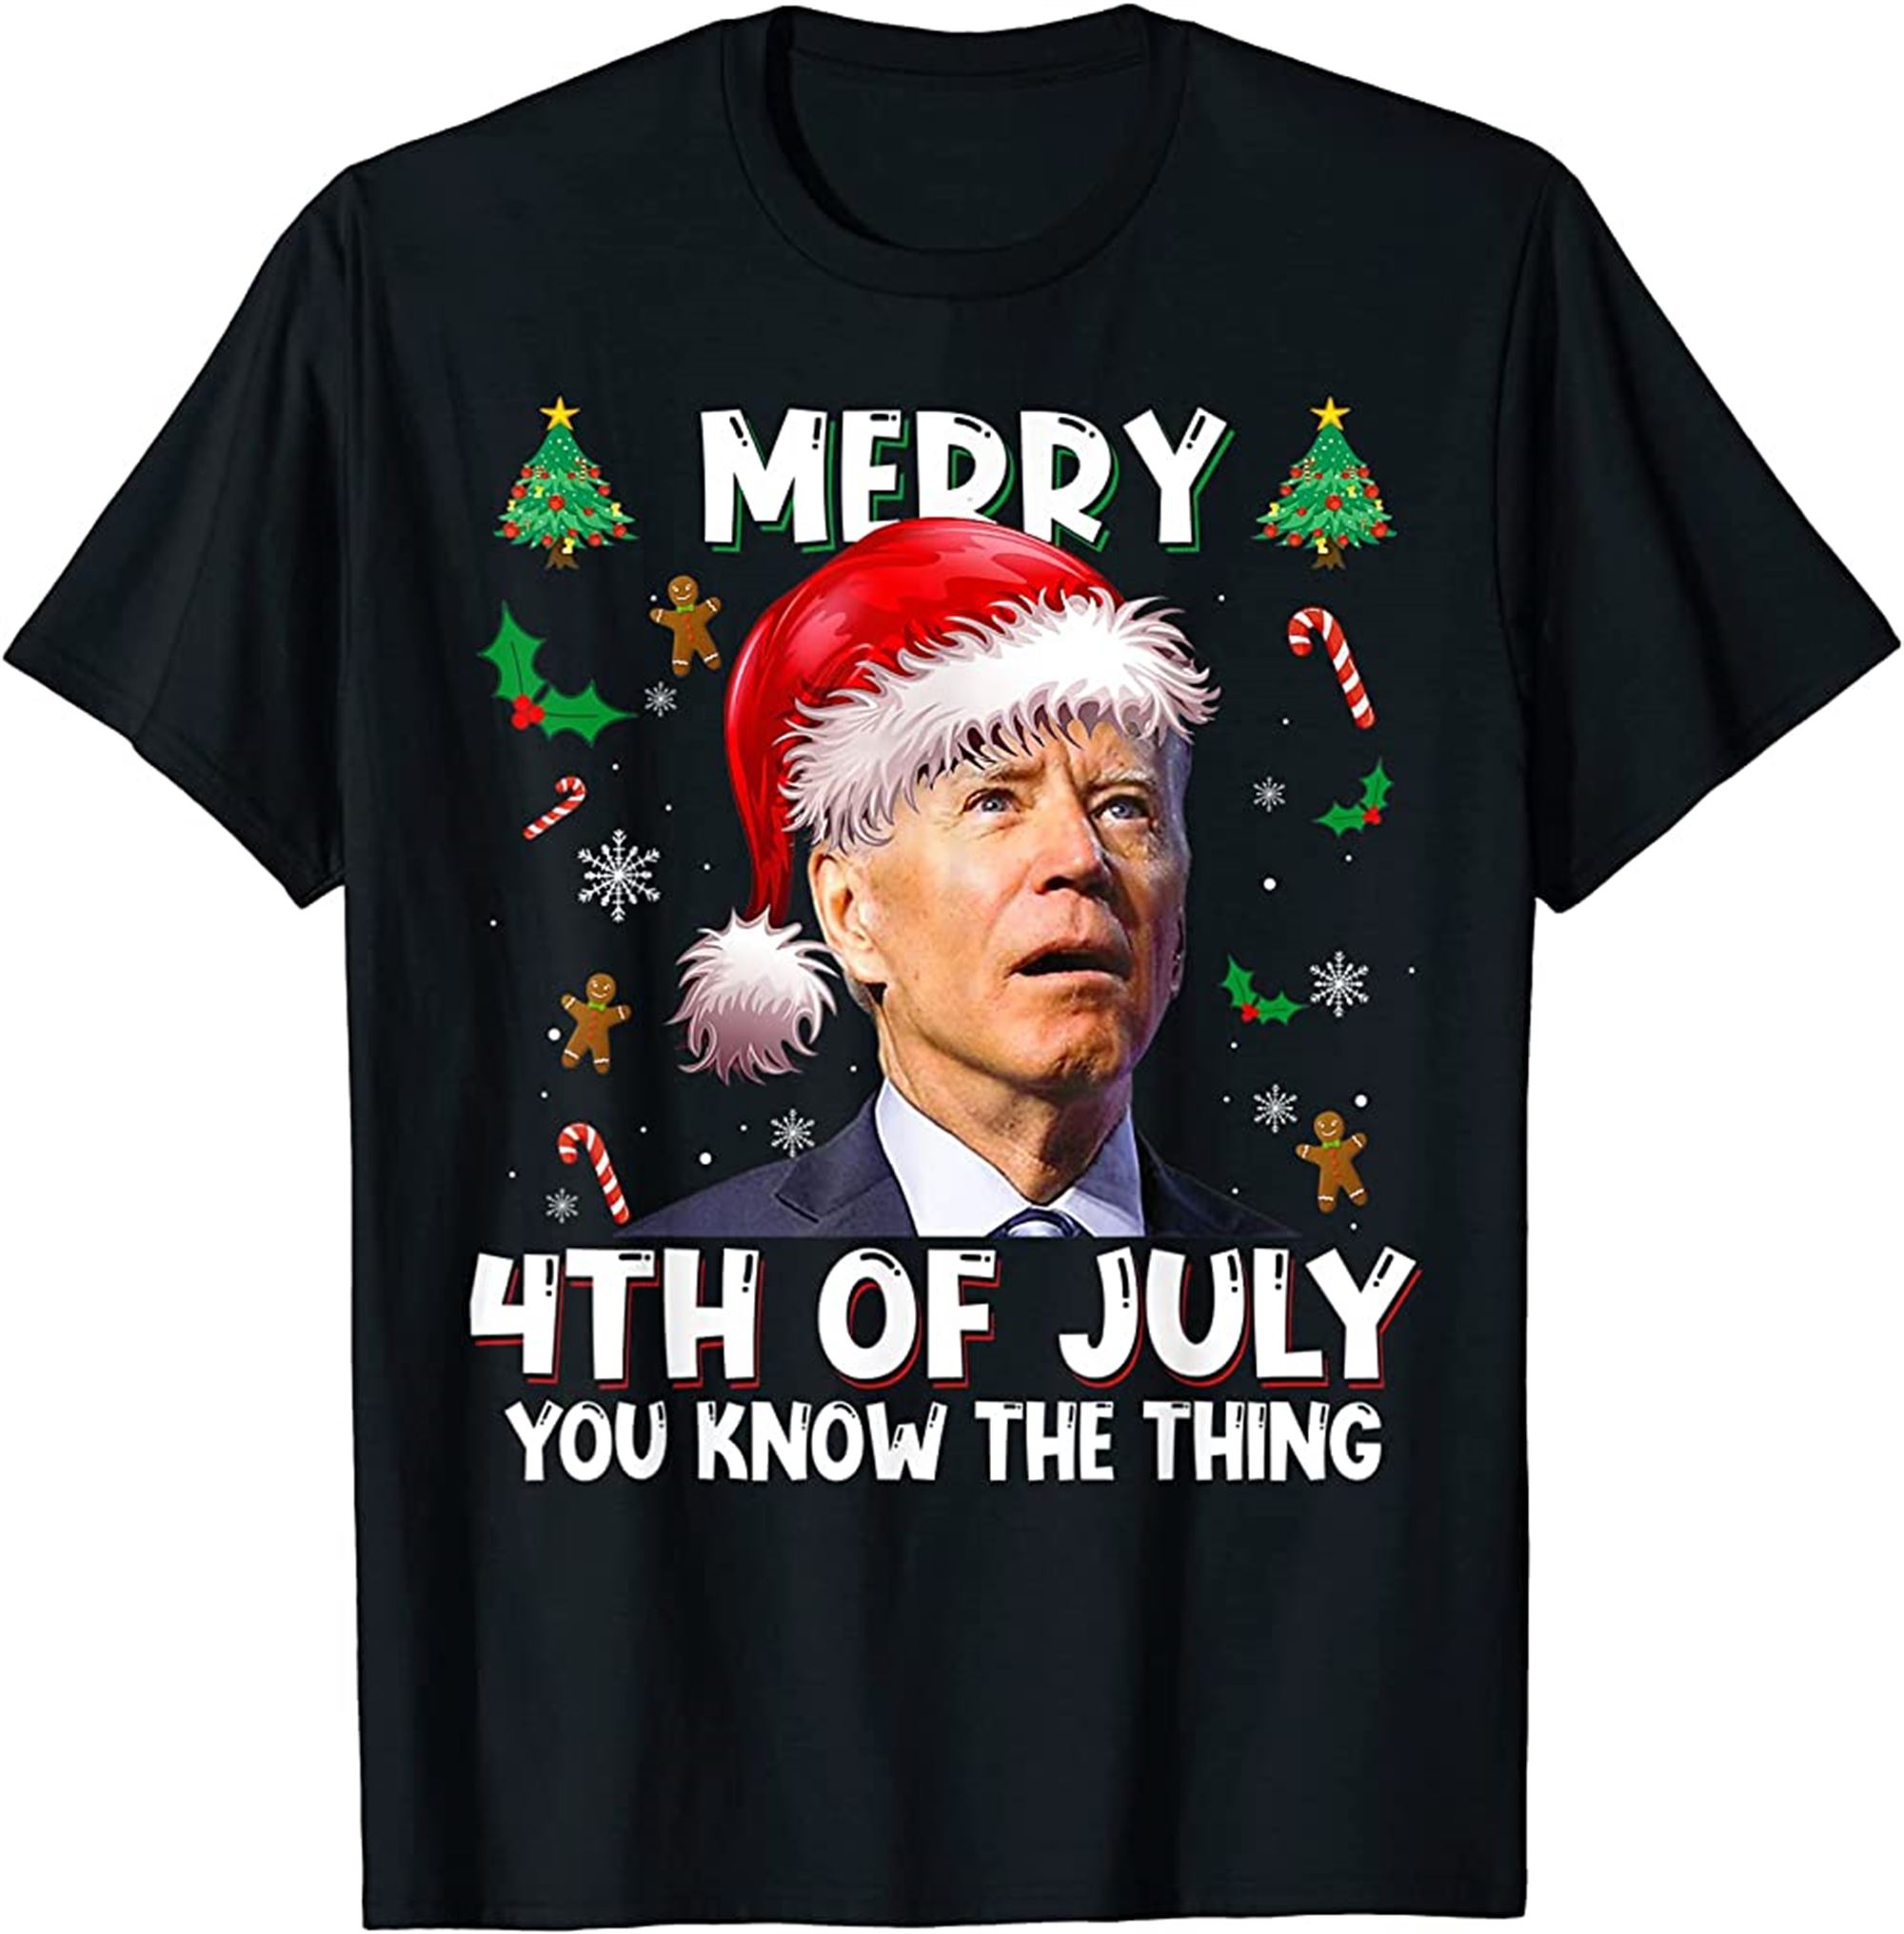 Merry 4th Of July You Know The Thing Santa Biden Christmas T-shirt Size Up To 5xl